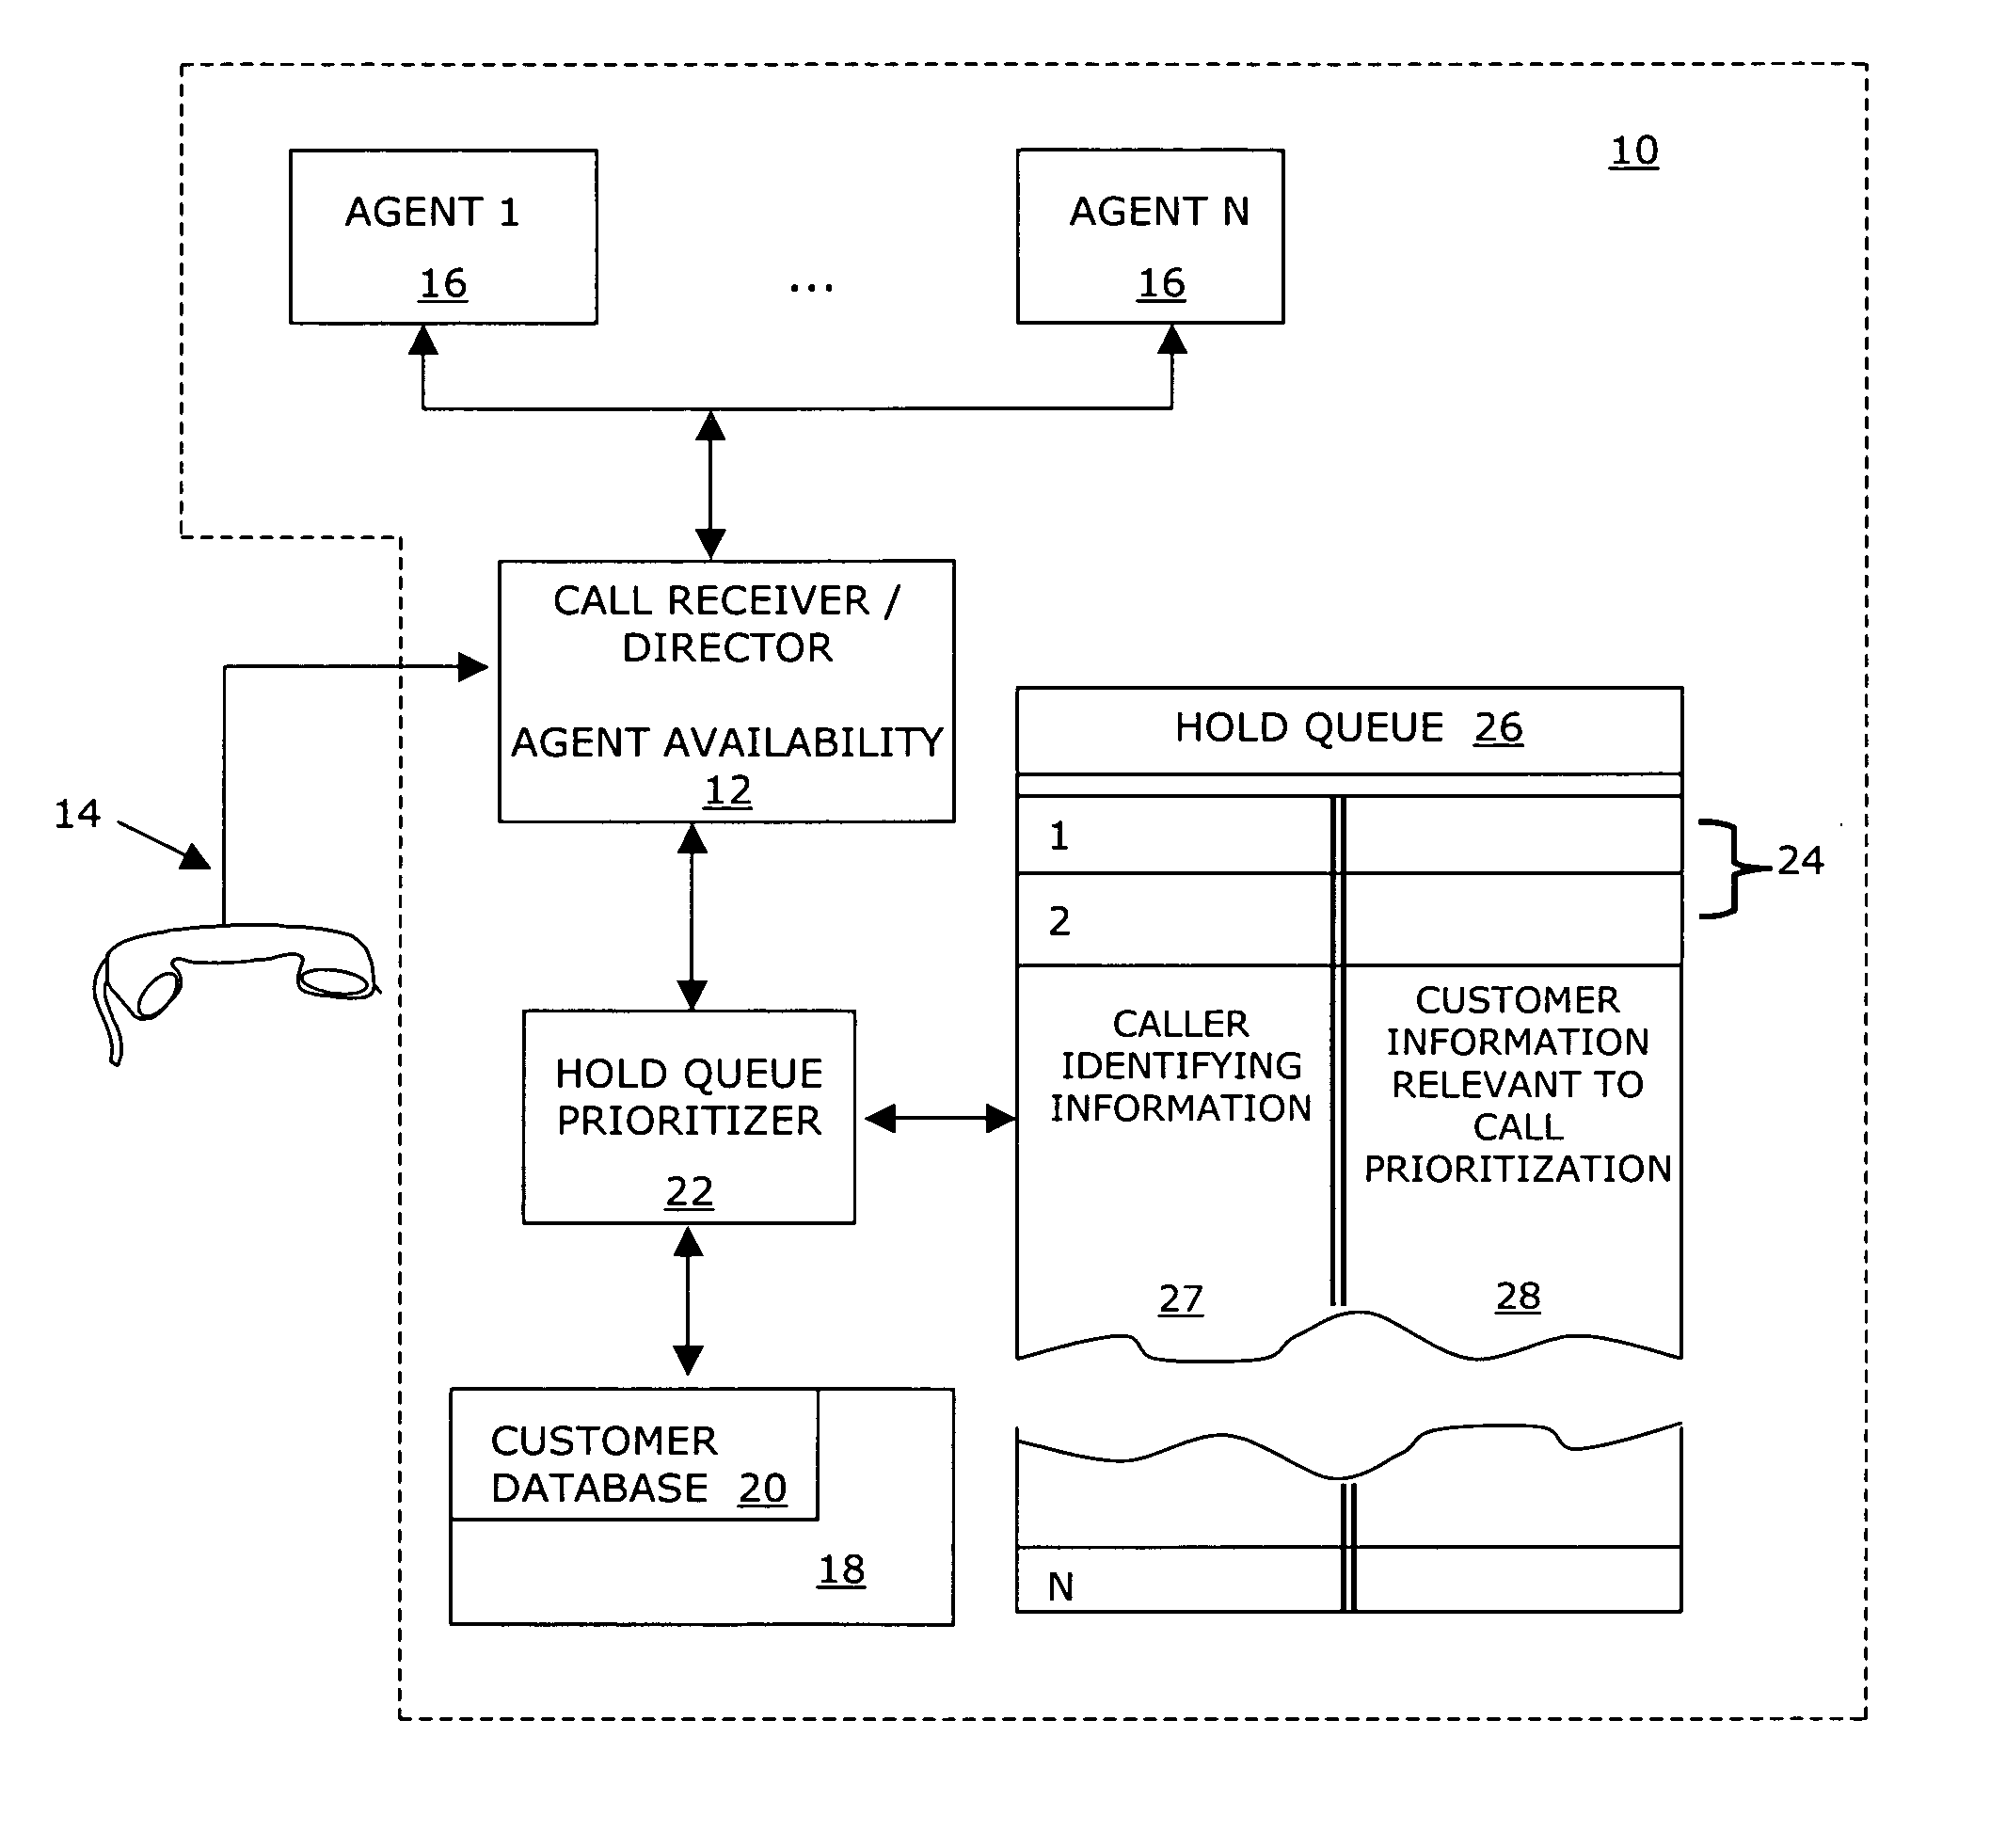 System and method for managing a hold queue based on customer information retrieved from a customer database